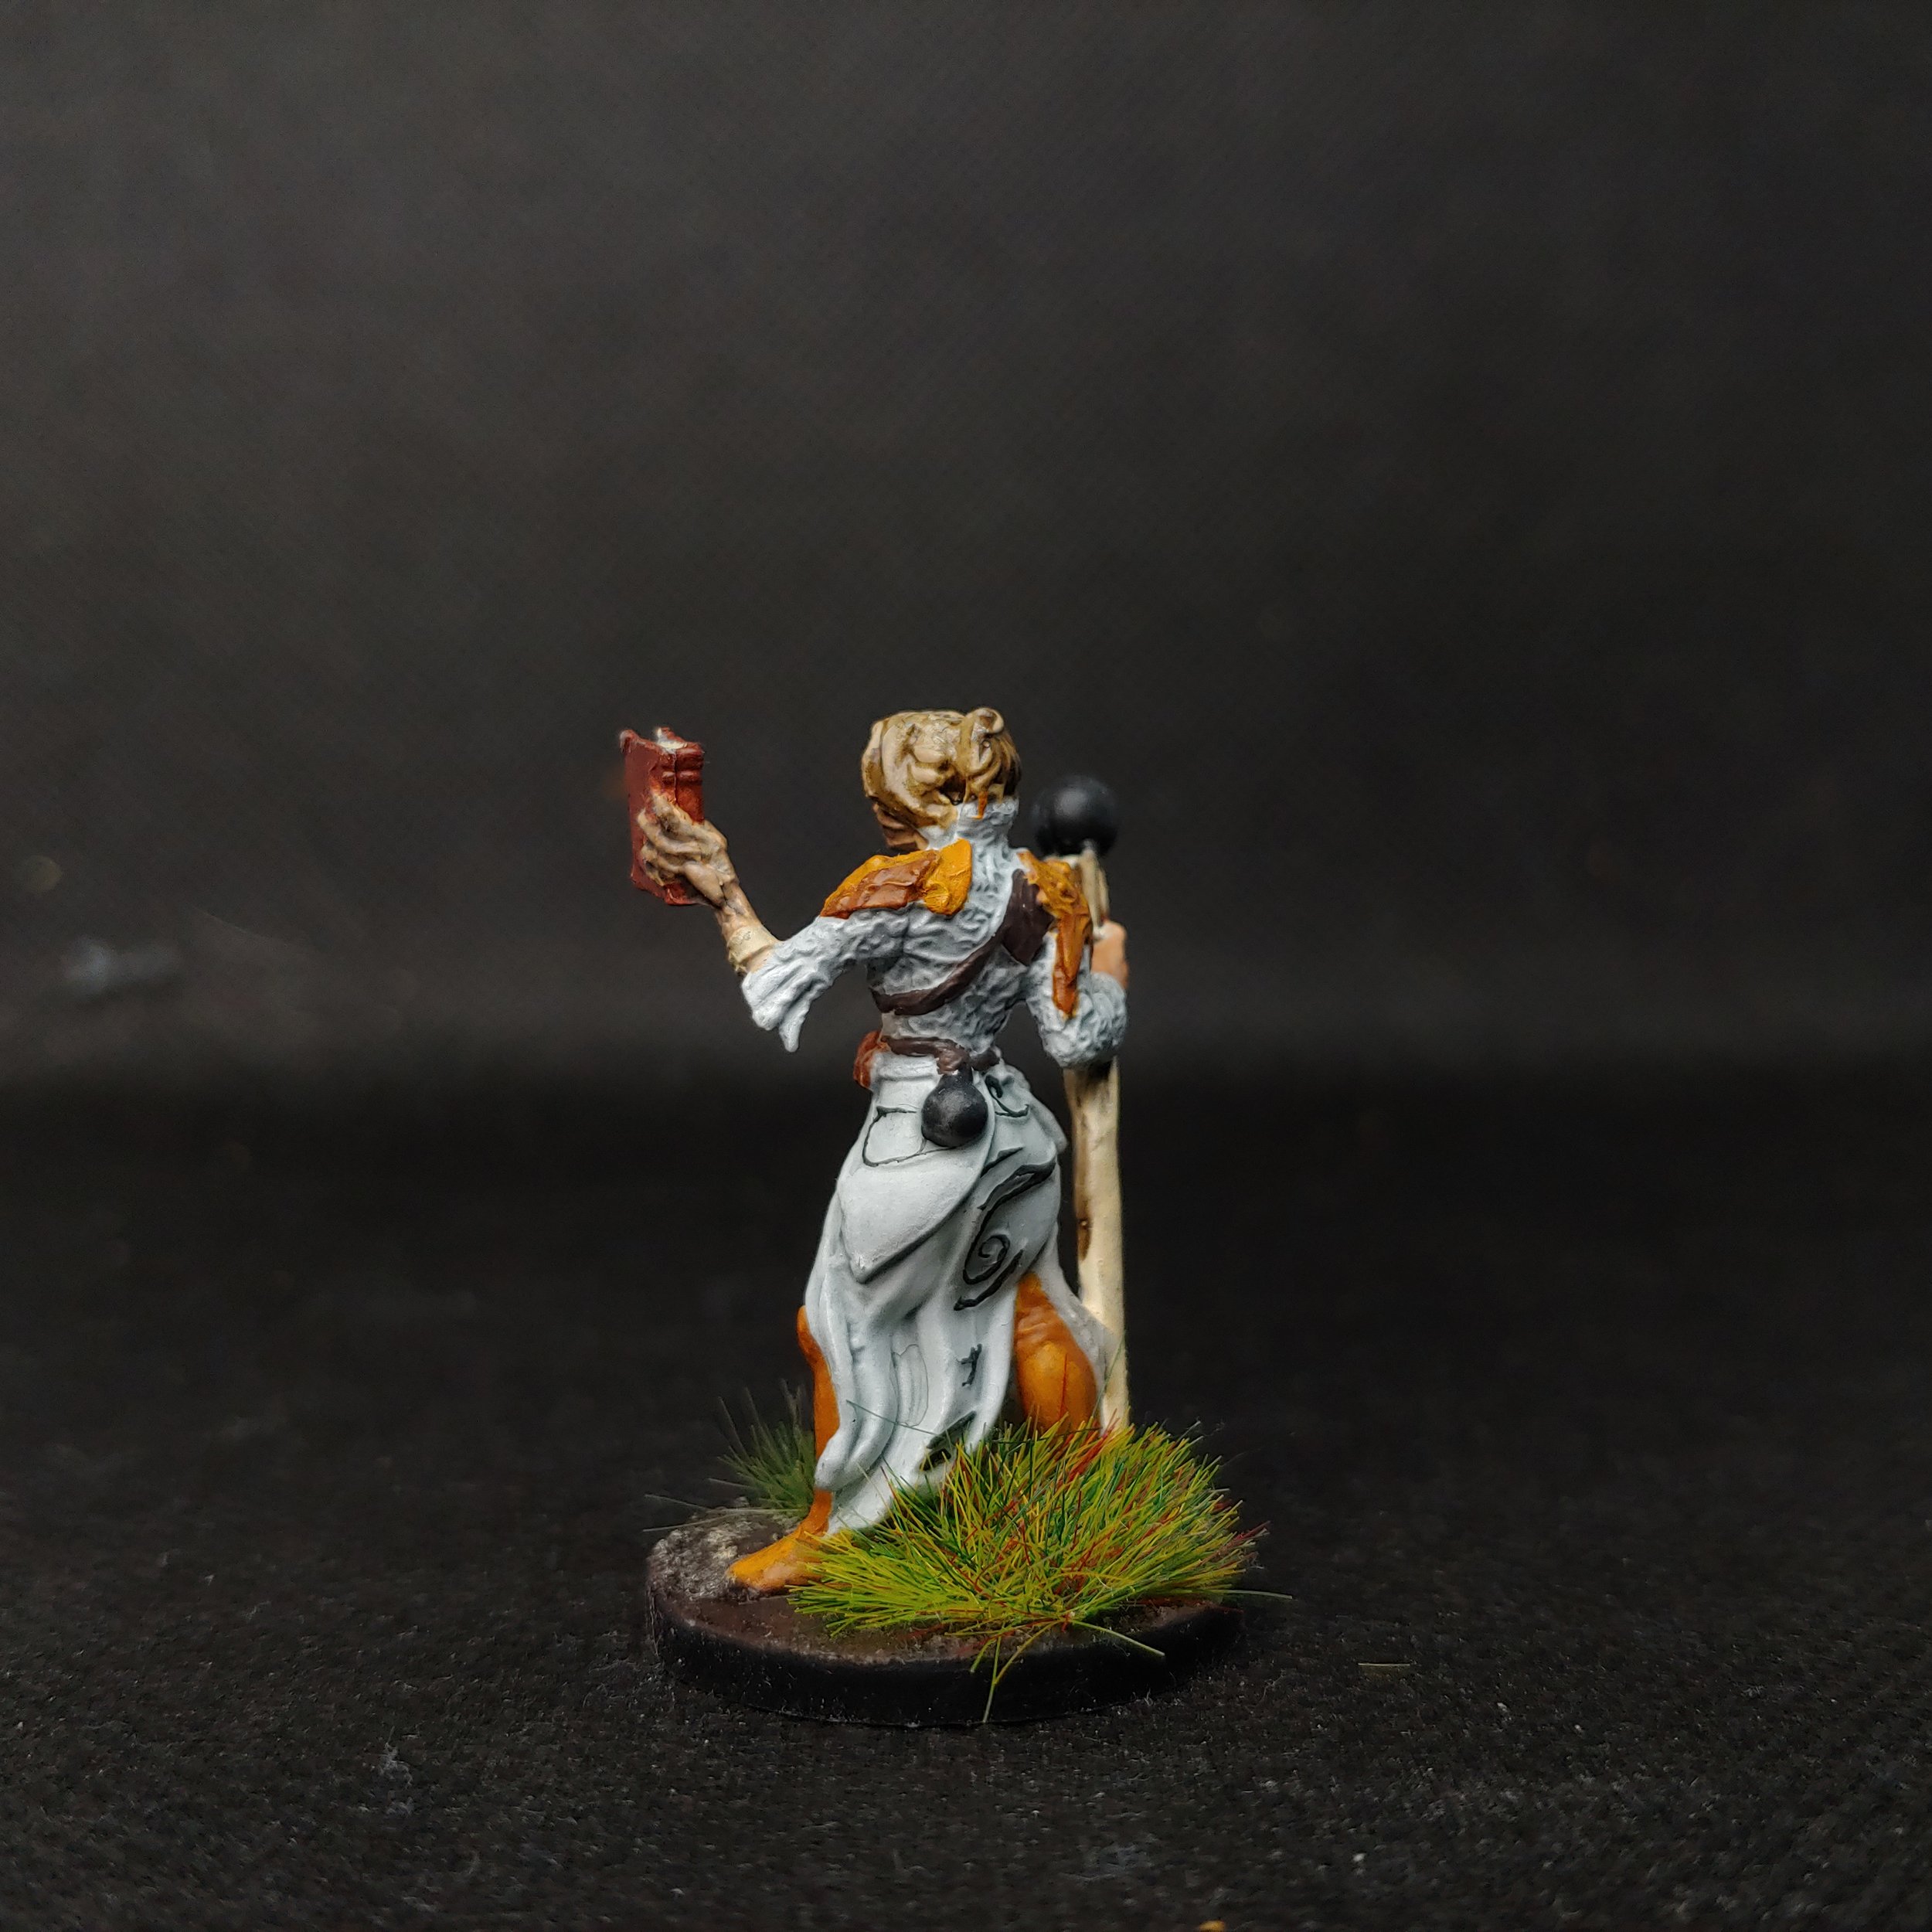 How to: Painting Gloomhaven Miniatures Using $1 Paints! - A Mom's Take